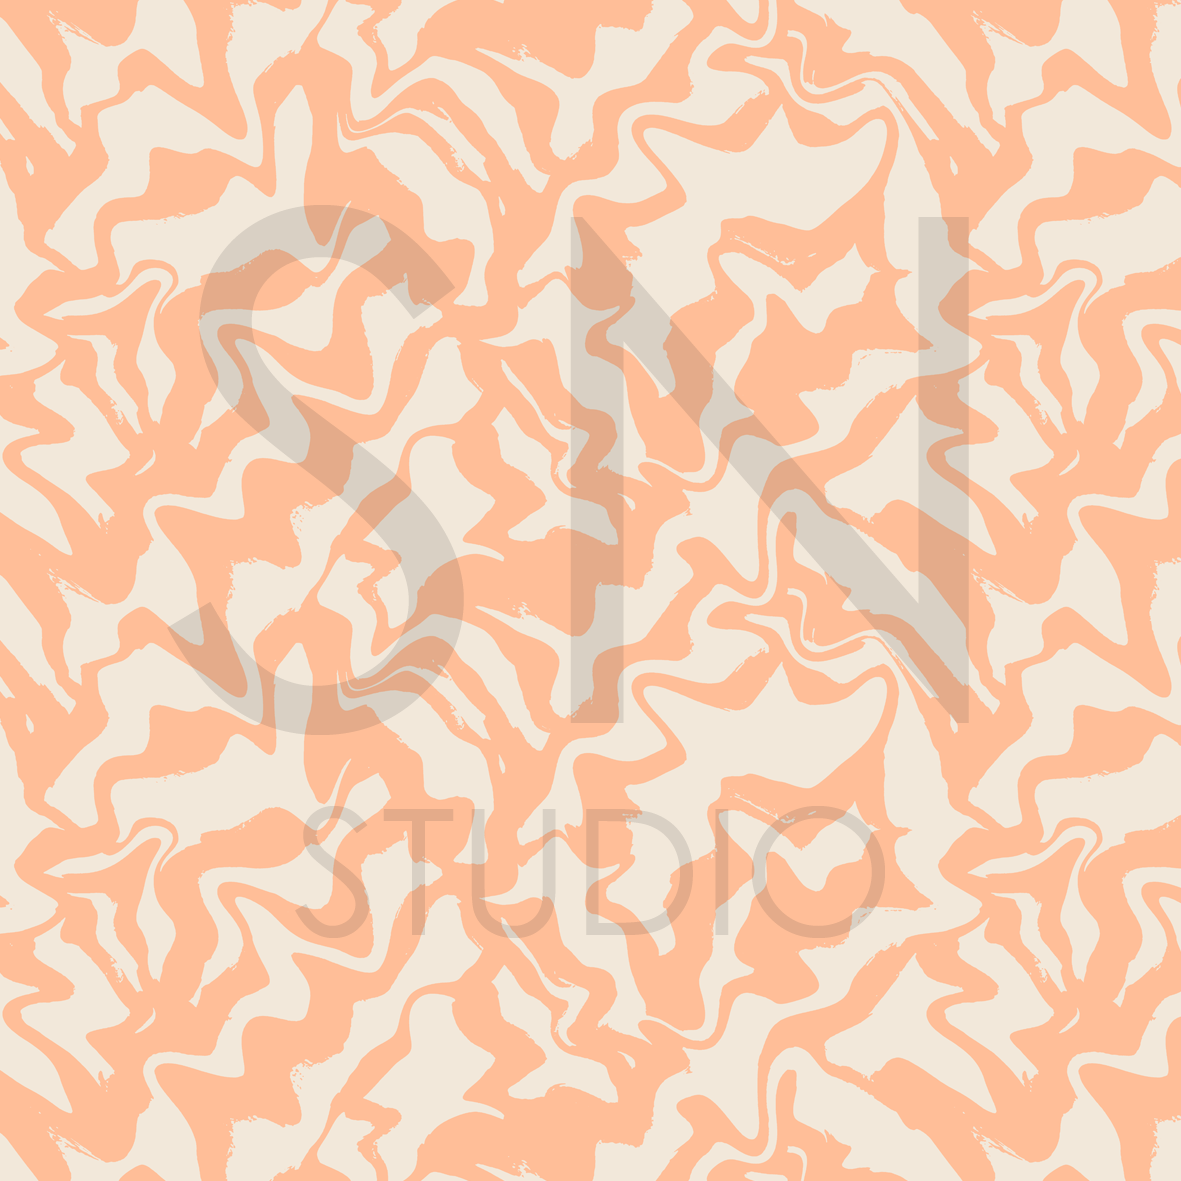 Peach Fuzz Zebra Vibes, an abstract animalskin surface design that merges the softness of peach fuzz with the boldness of zebra patterns. This pattern combines warm peach tones with the iconic black and white stripes, creating a visually dynamic and sophisticated composition